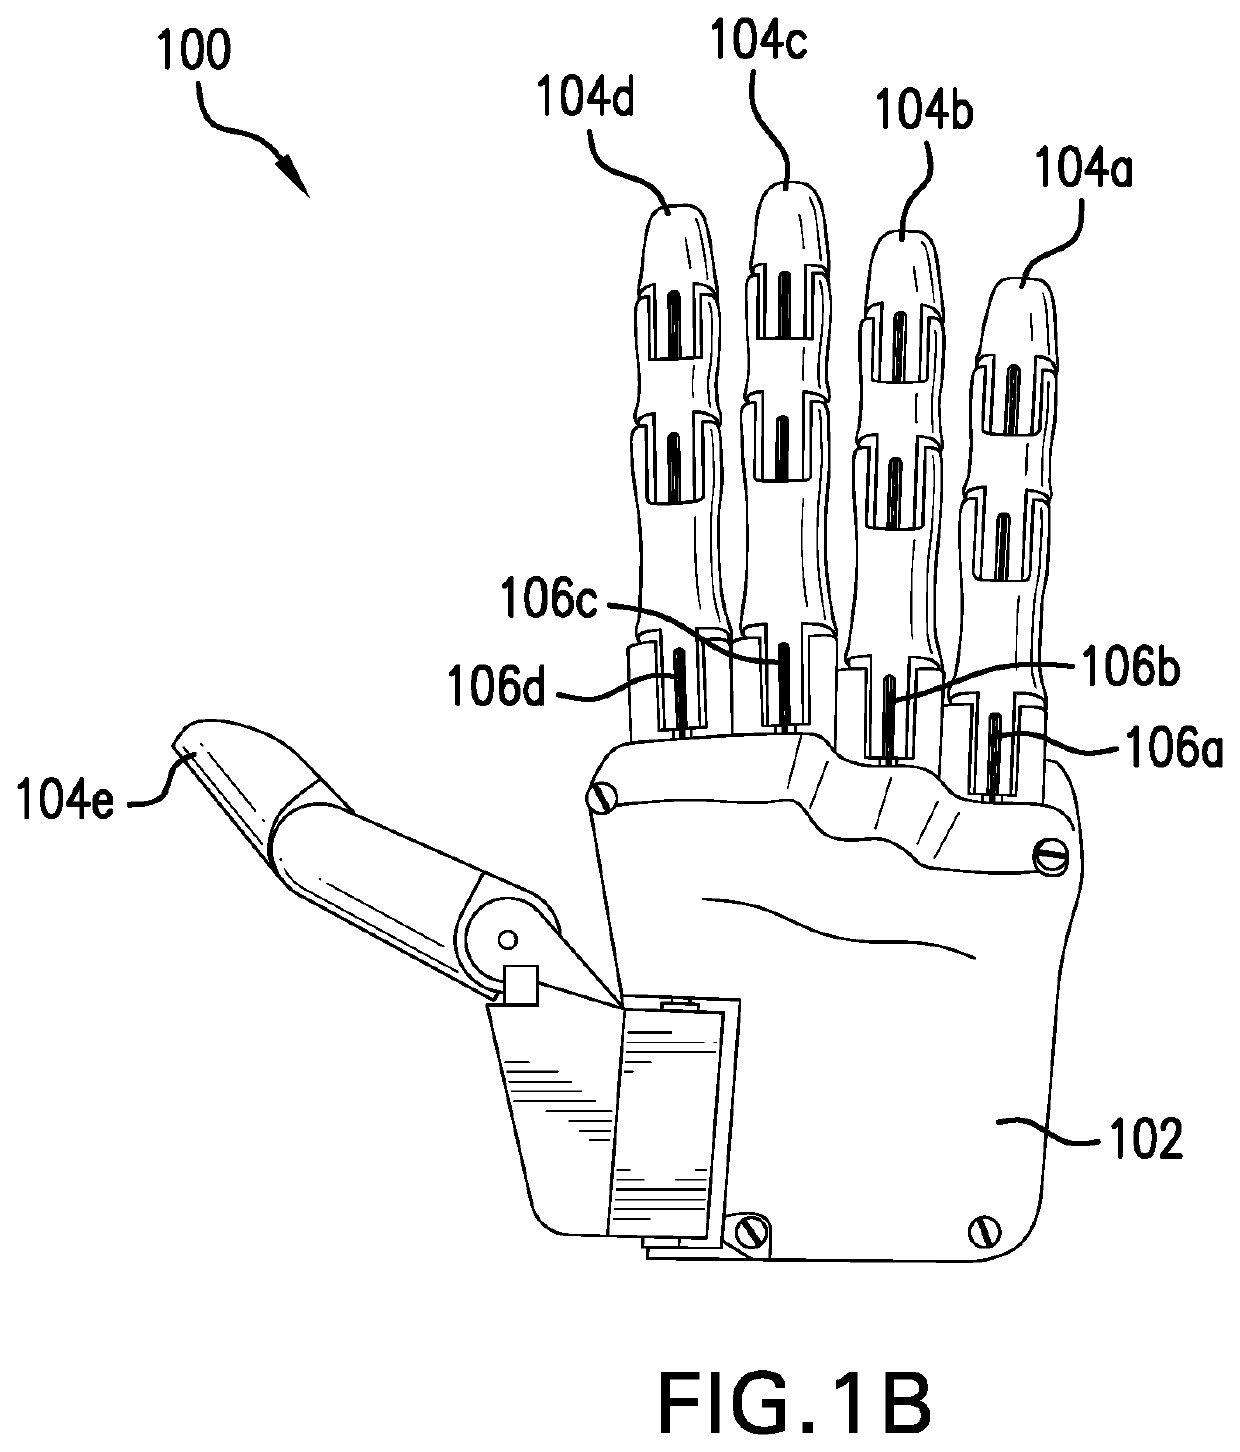 Systems and methods for fine motor control of fingers on a prosthetic hand to emulate a natural stroke